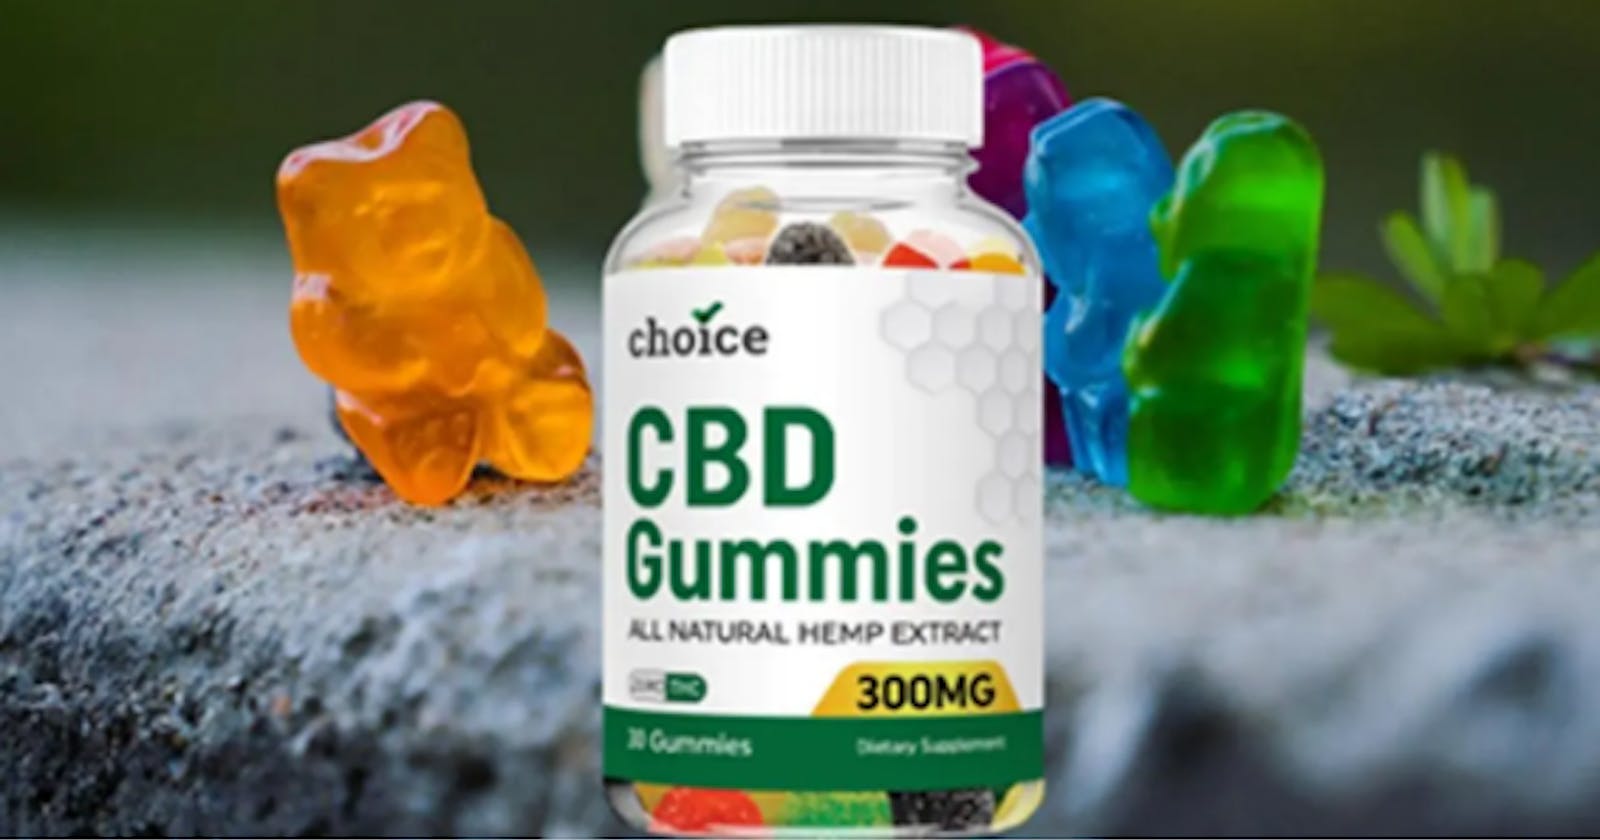 Choice CBD Gummies Shark Tank Reviews [Scam Warning 2023] Full Spectrum CBD Oil | Scam Exposed! Review The Reality Before Buy!